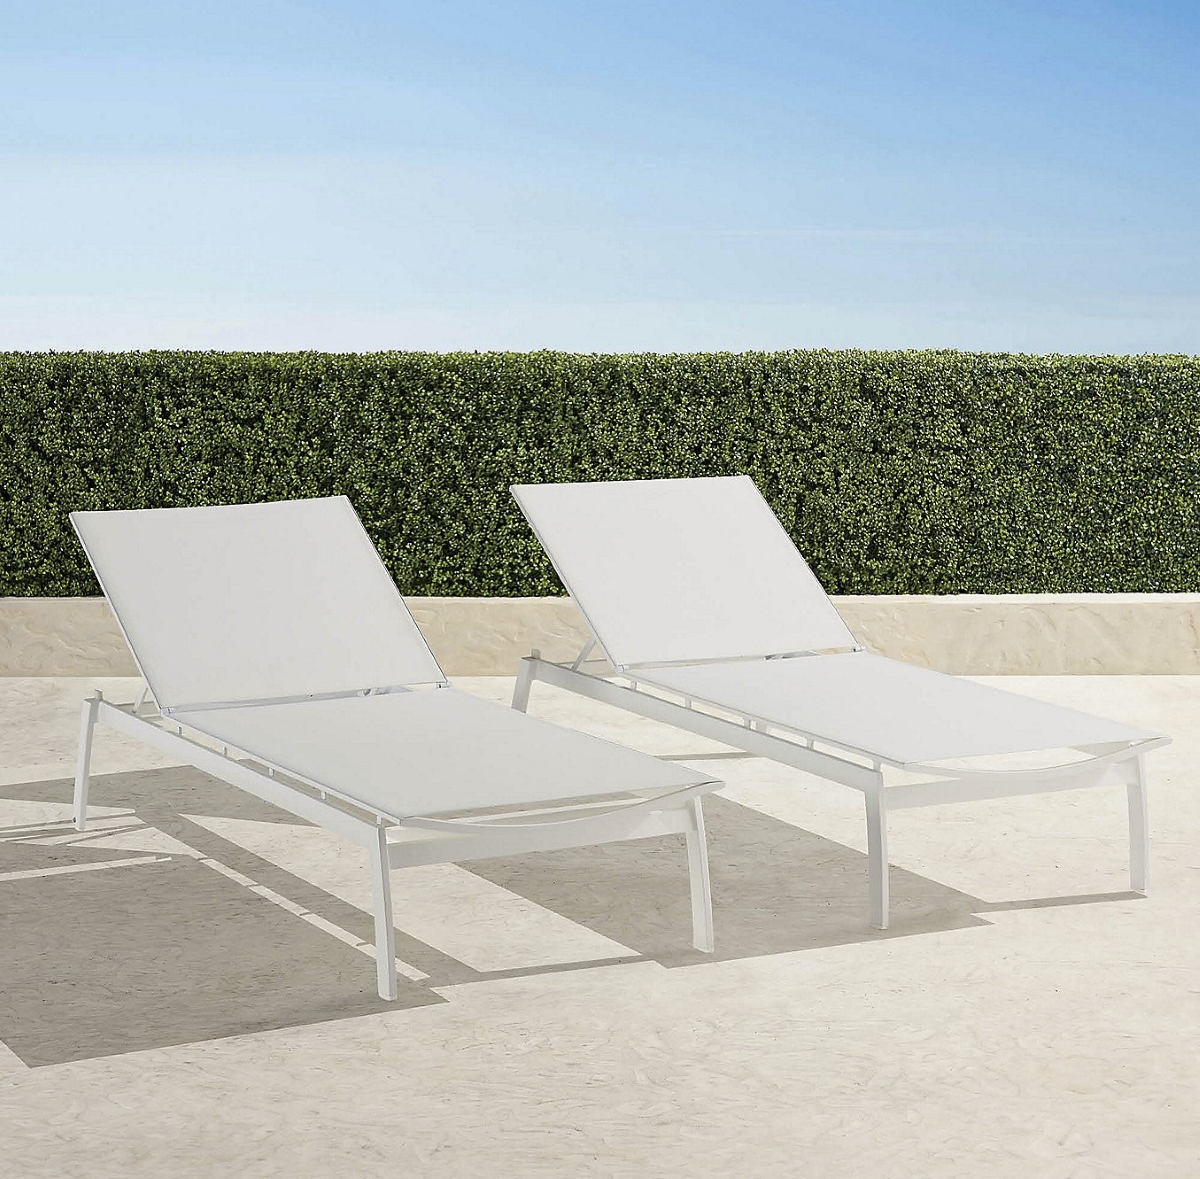 Two white aluminum chaises on patio.